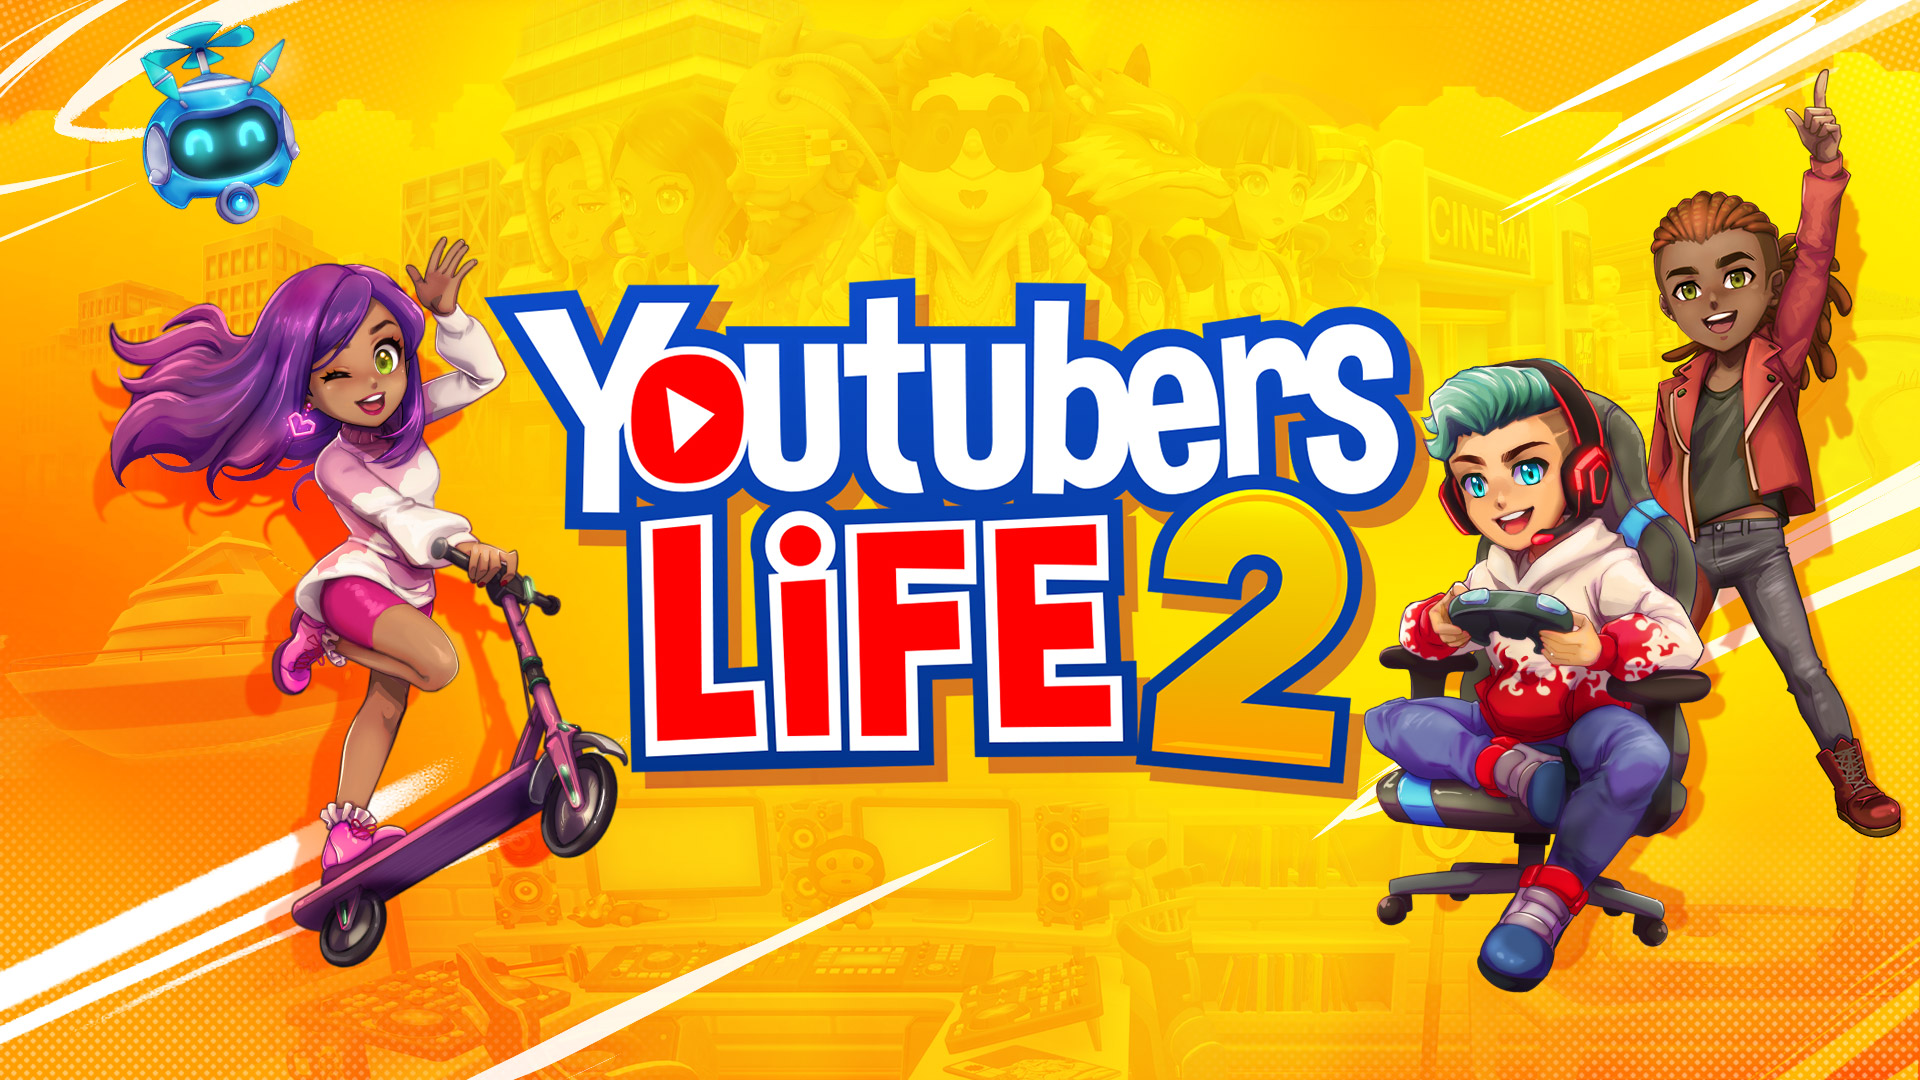 Game Review: rs Life 2 – Little Bits of Gaming & Movies